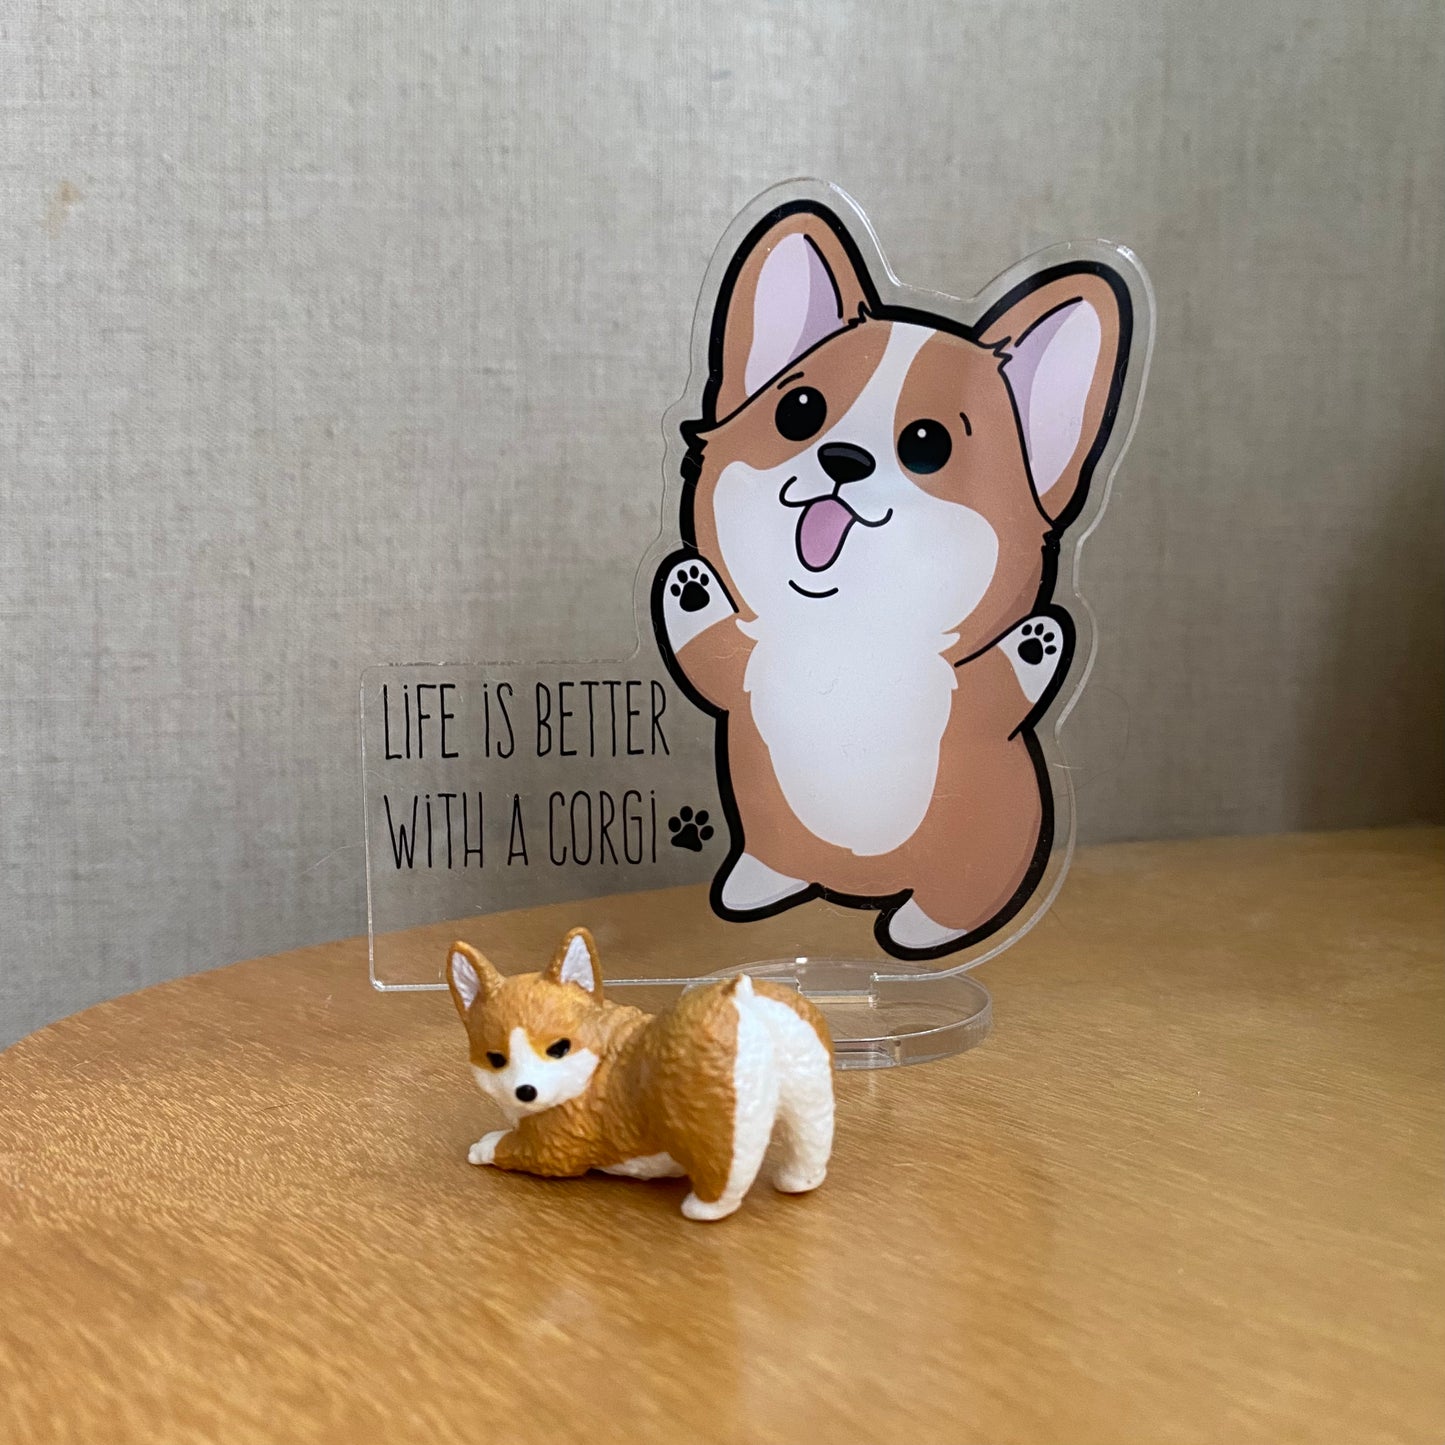 Life is better with a corgi 立牌